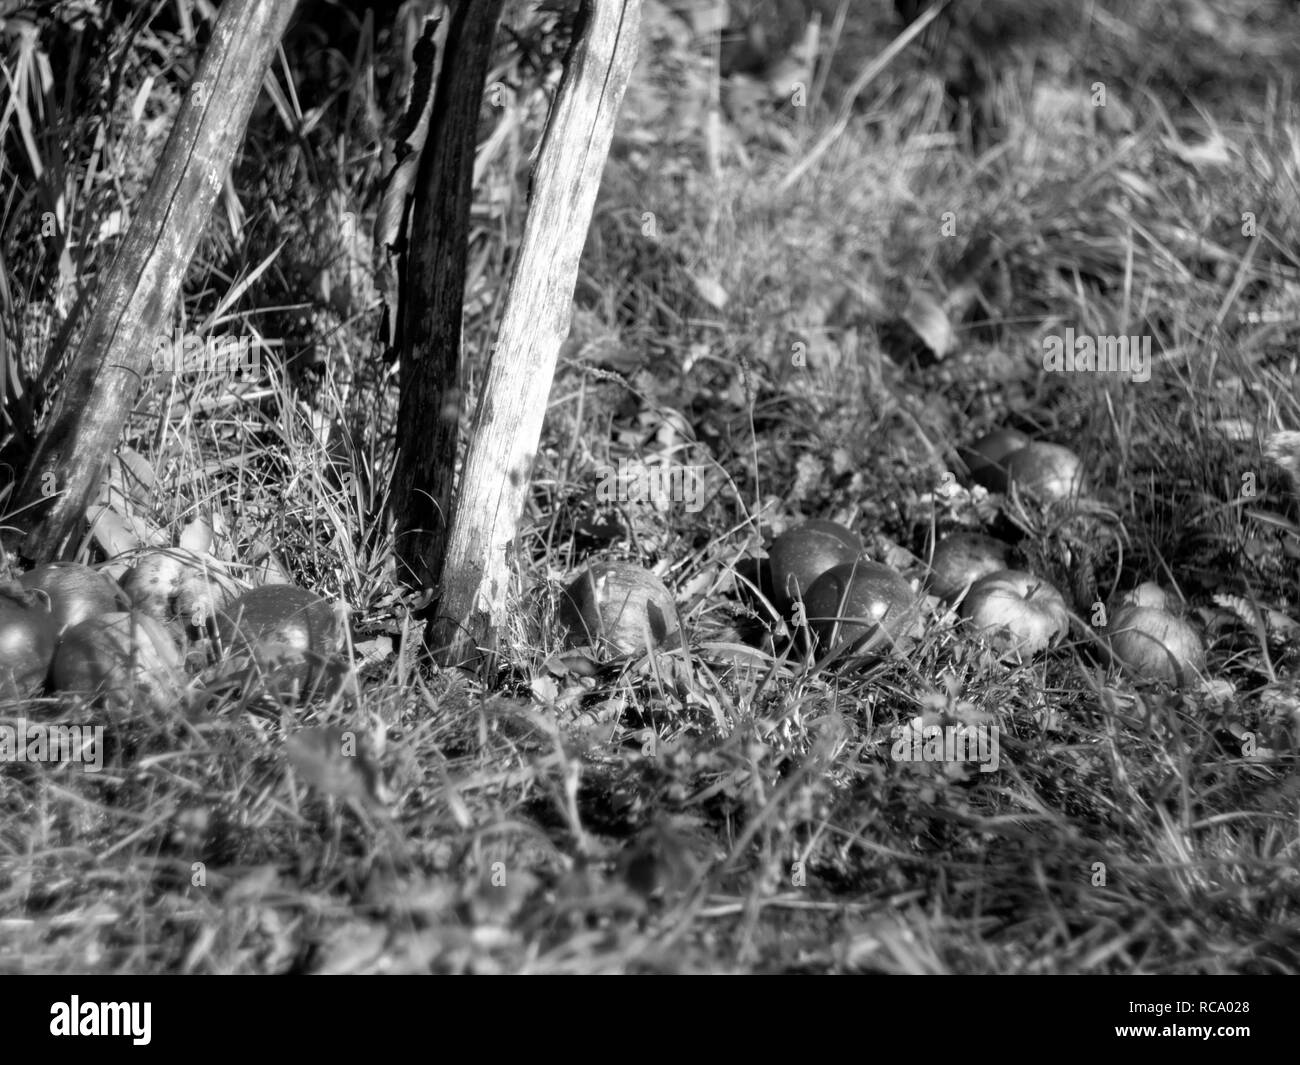 apples fallen from a tree in autumn, black and white photo Stock Photo